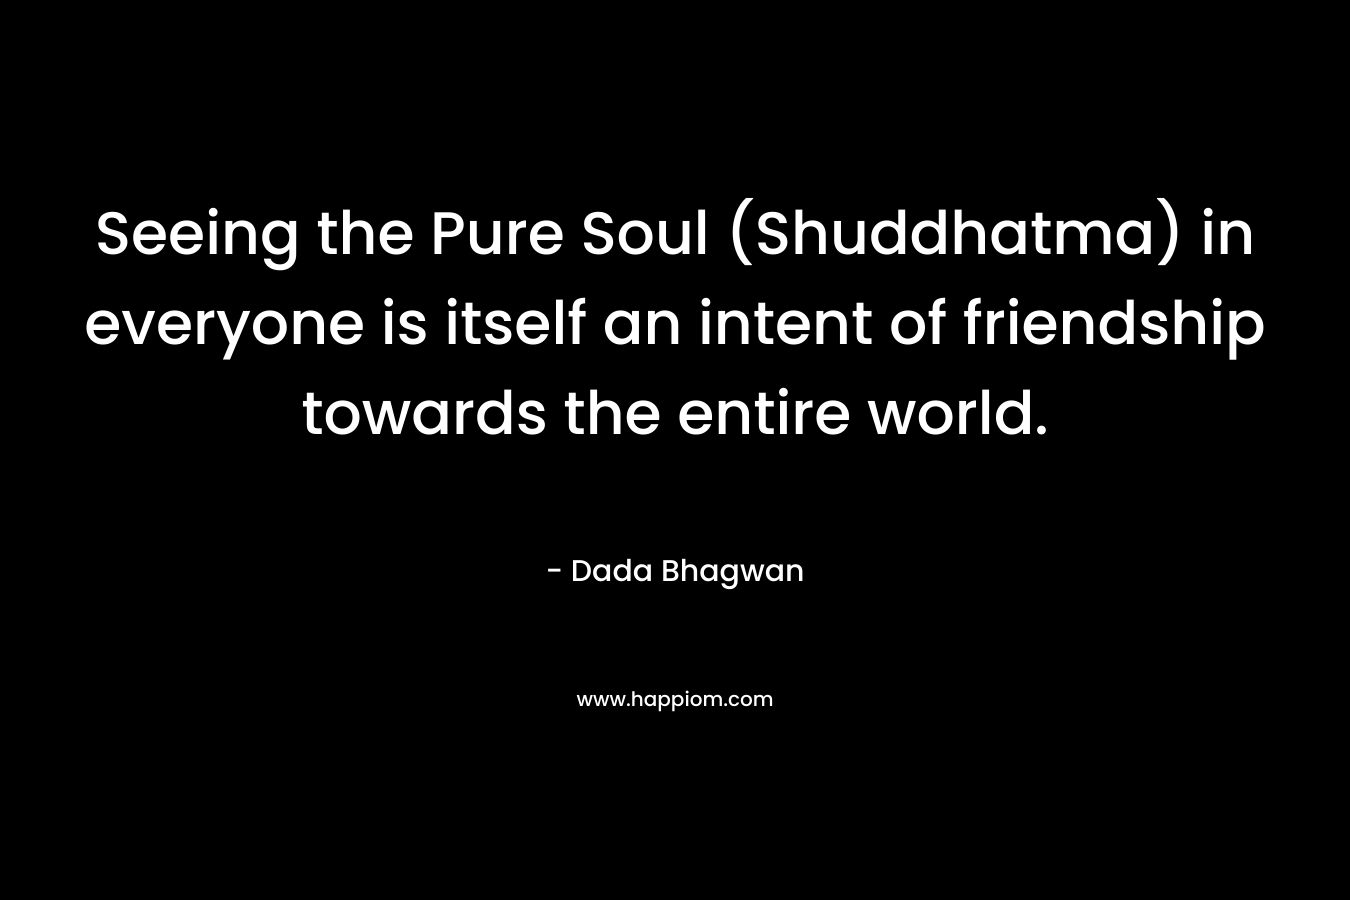 Seeing the Pure Soul (Shuddhatma) in everyone is itself an intent of friendship towards the entire world.